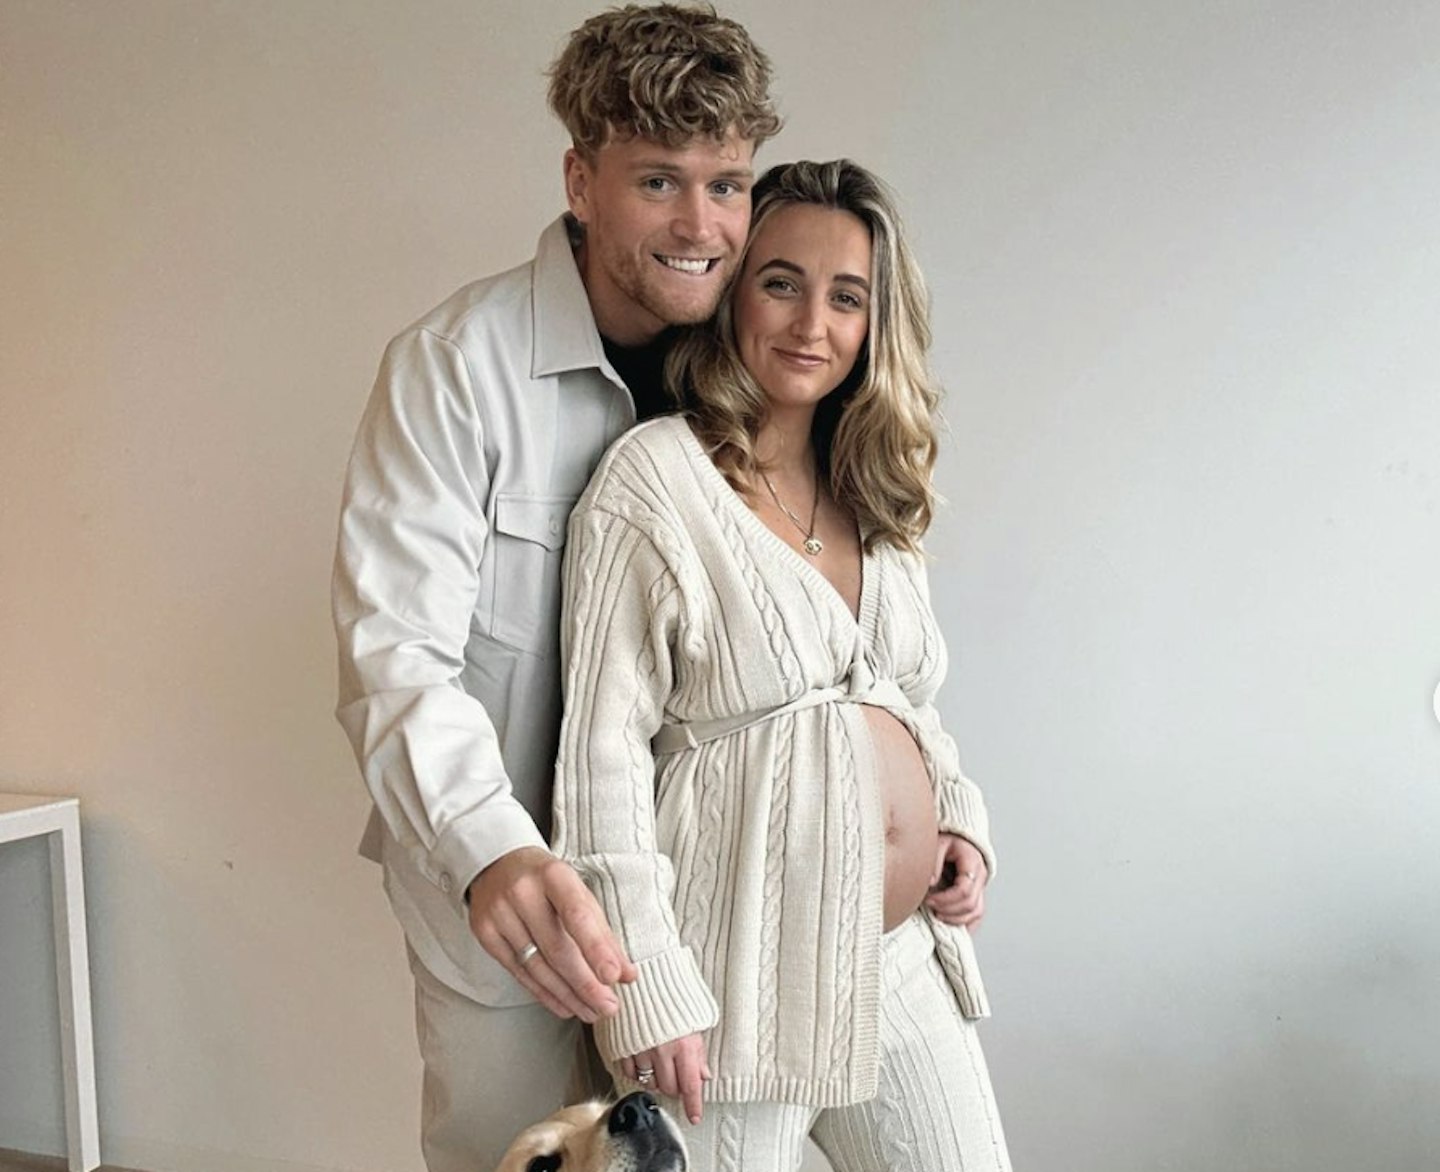 Tiff Watson is expecting her first child